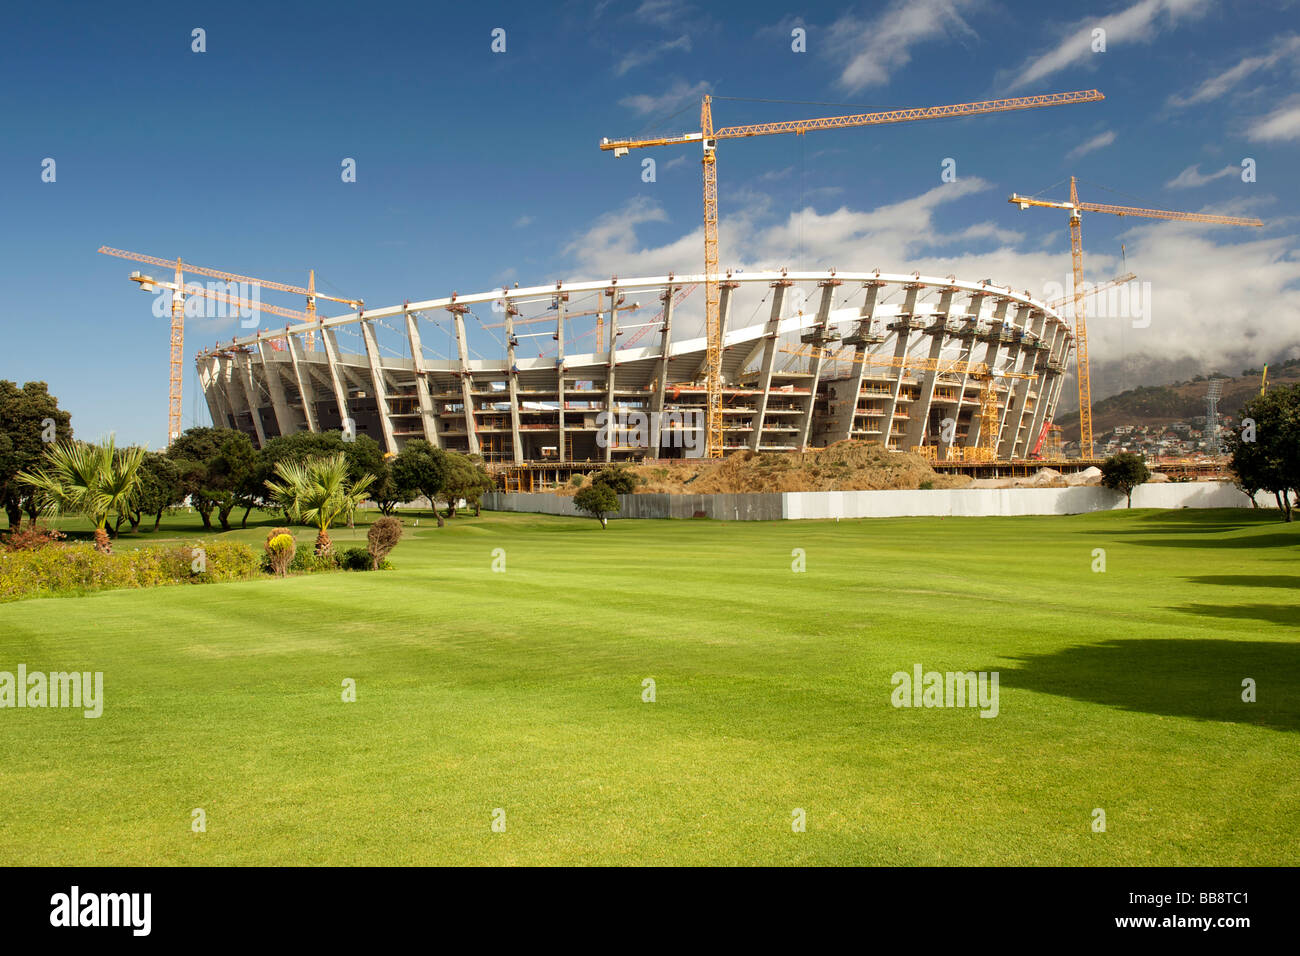 The FIFA 2010 world cup soccer stadium under construction in Cape Town, South Africa. Stock Photo